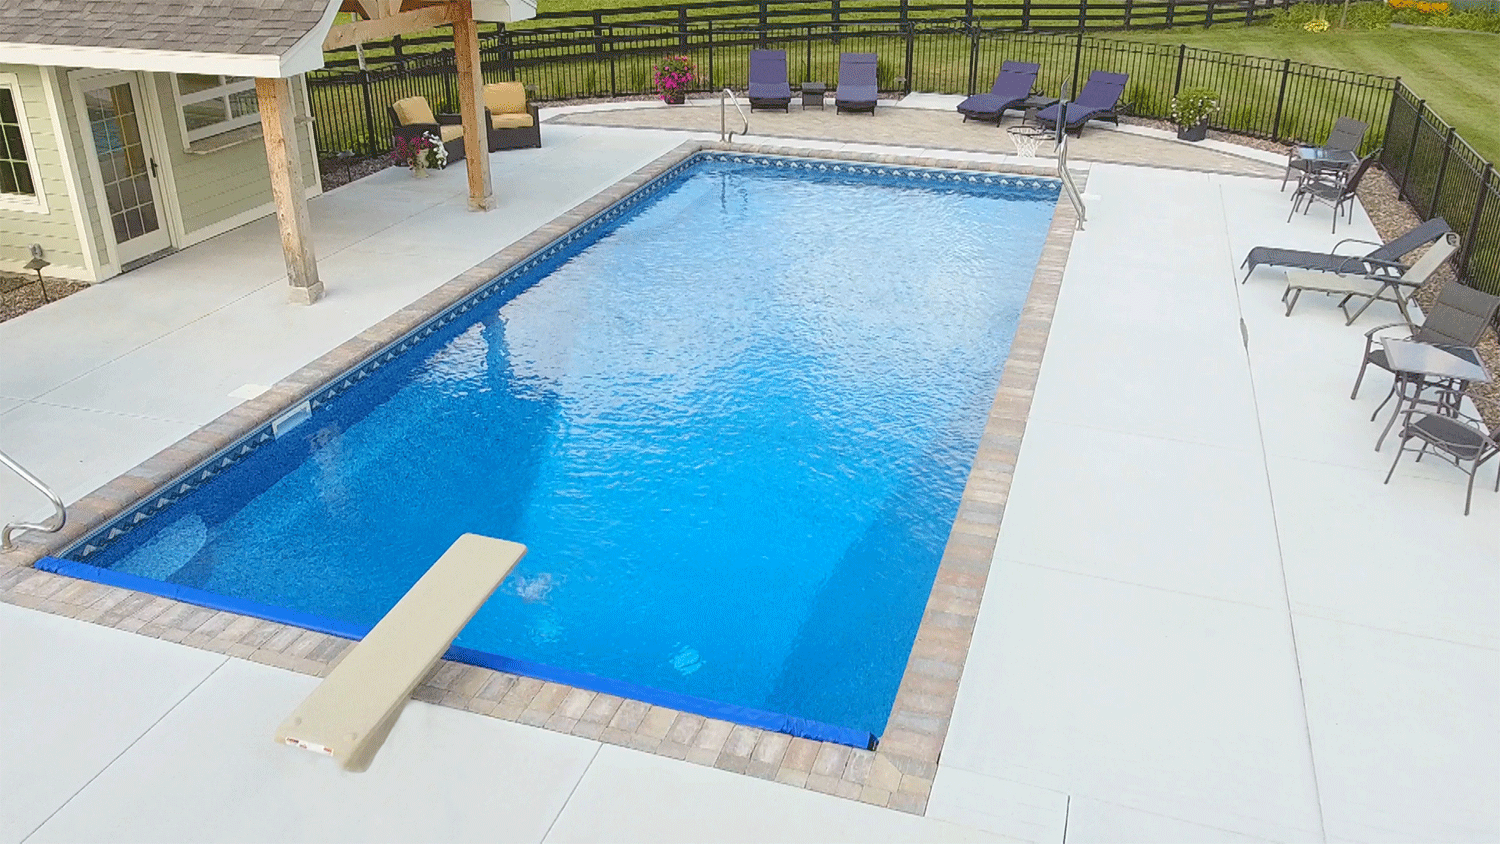 Rectangular inground vinyl liner pool with diving board and pool house.